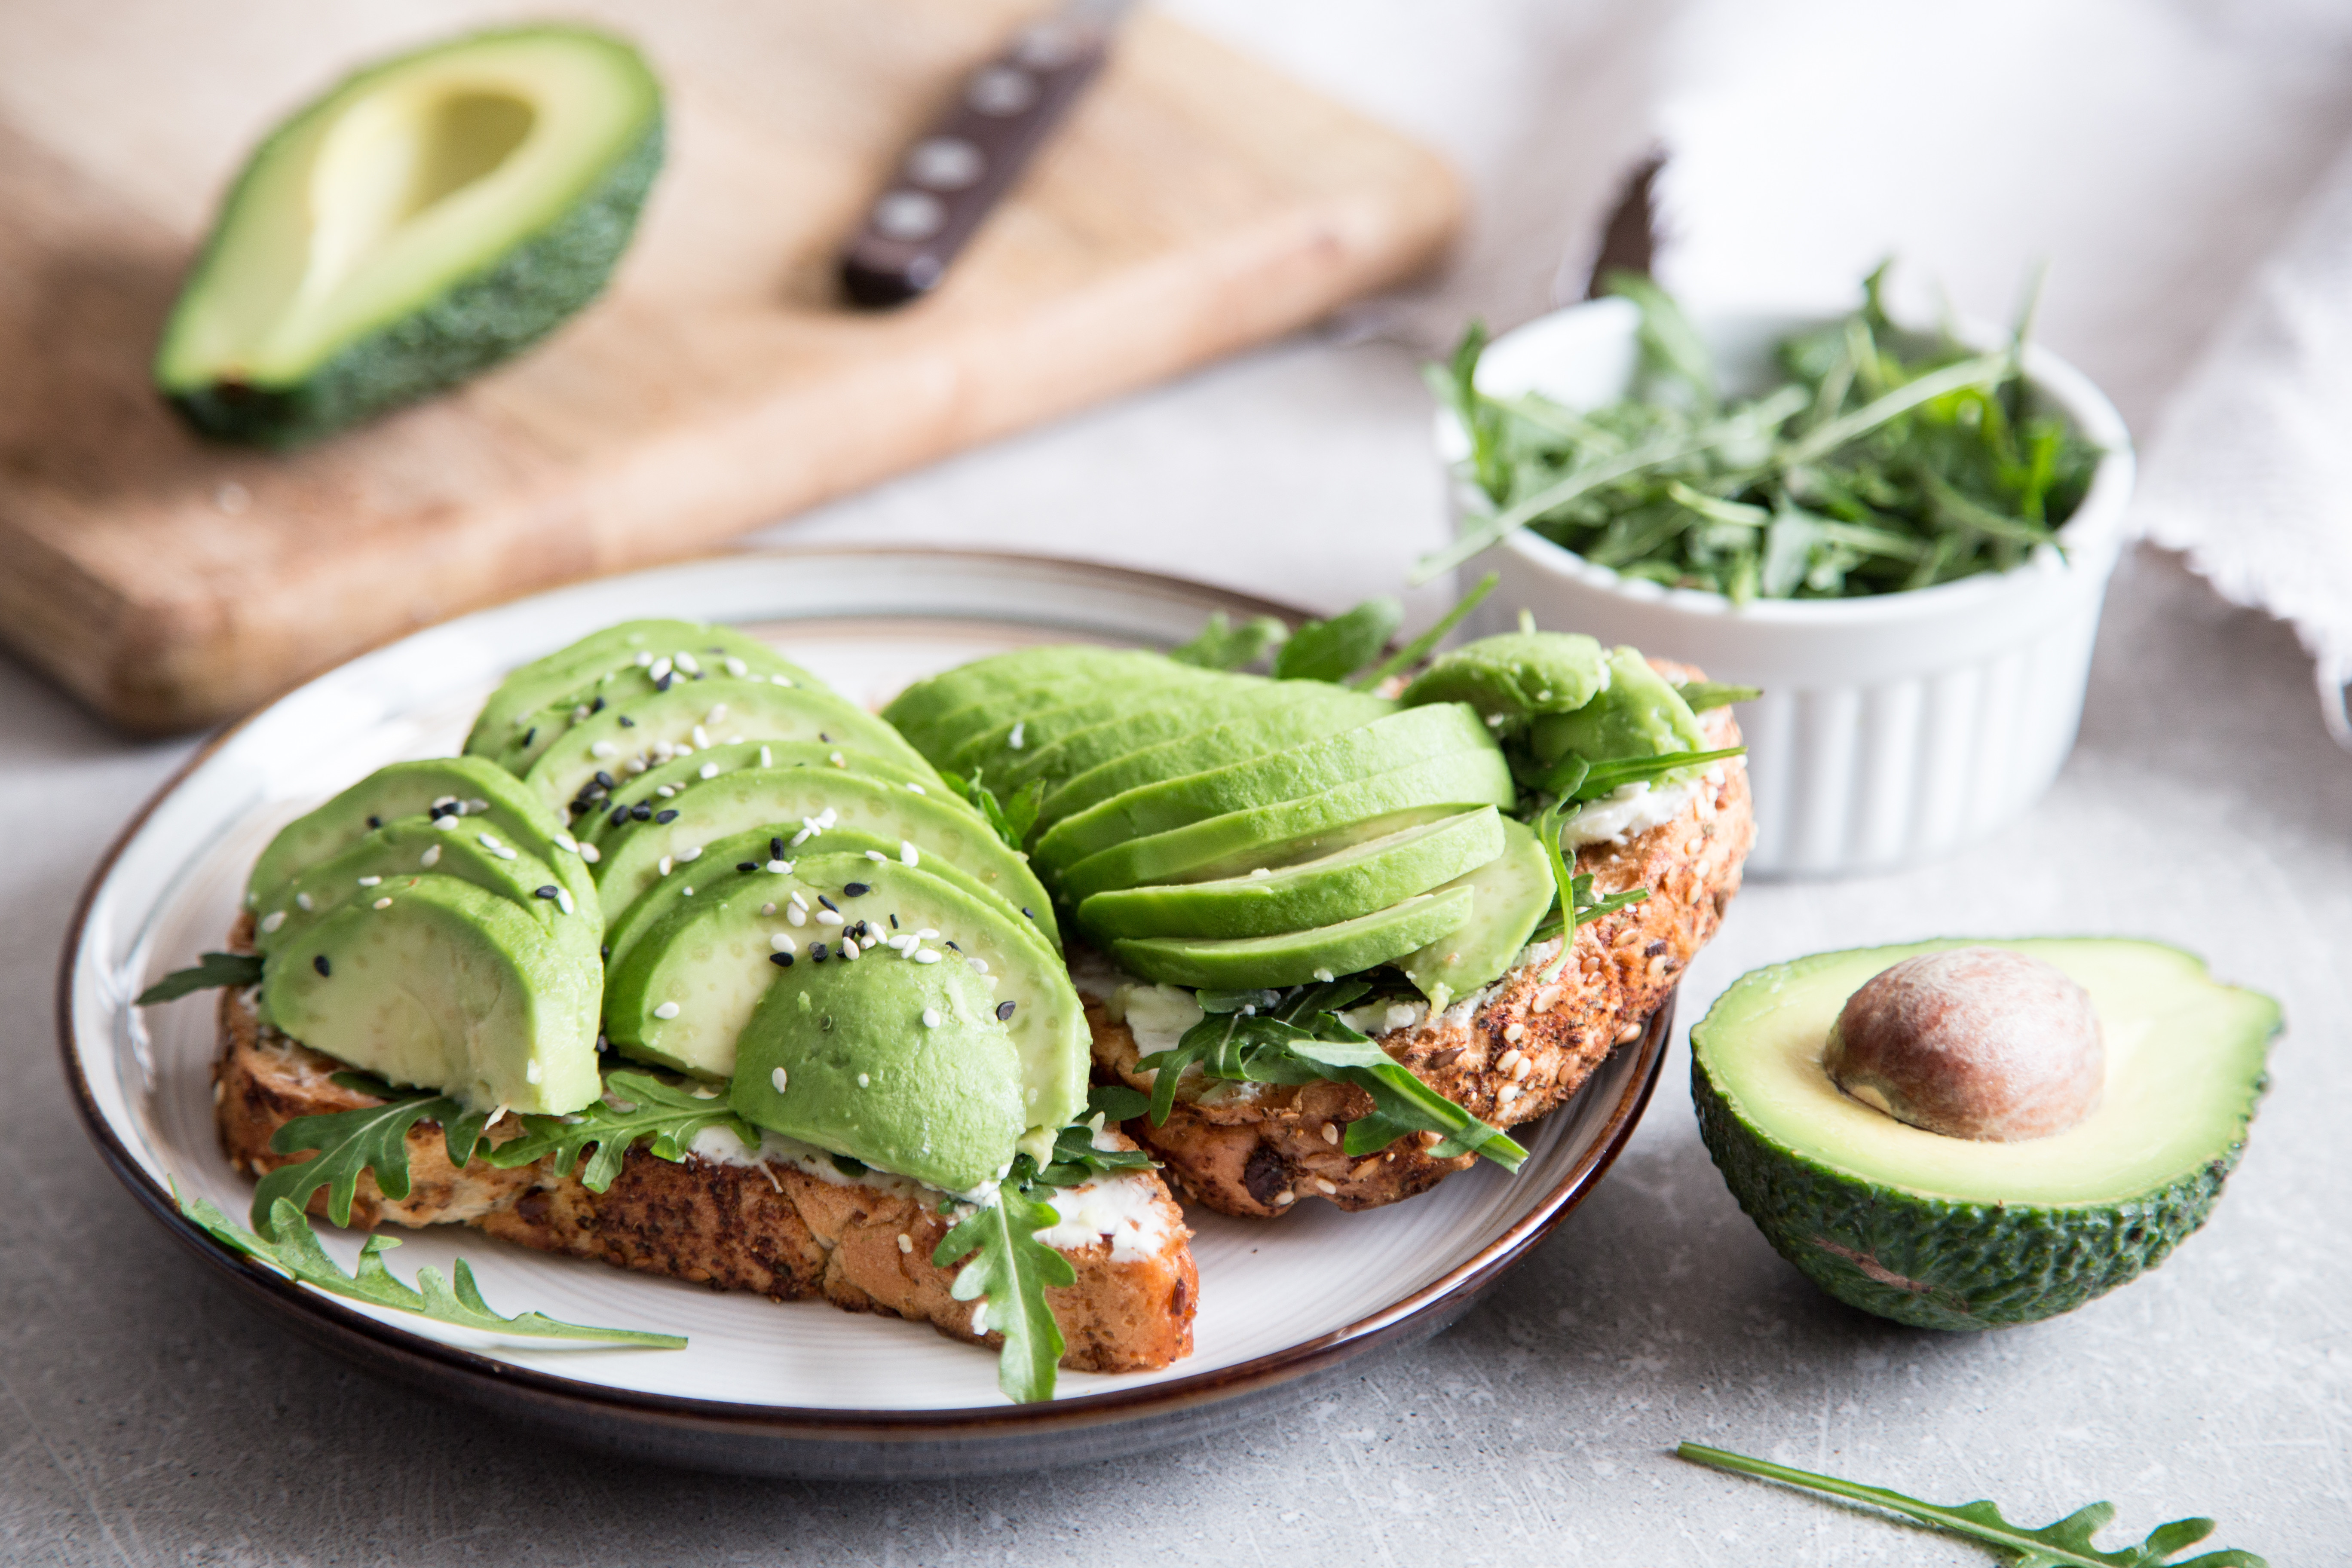 healthy breakfast with avocado and Delicious wholewheat toast. sliced avocado on toast bread with spices. Mexican cuisine/